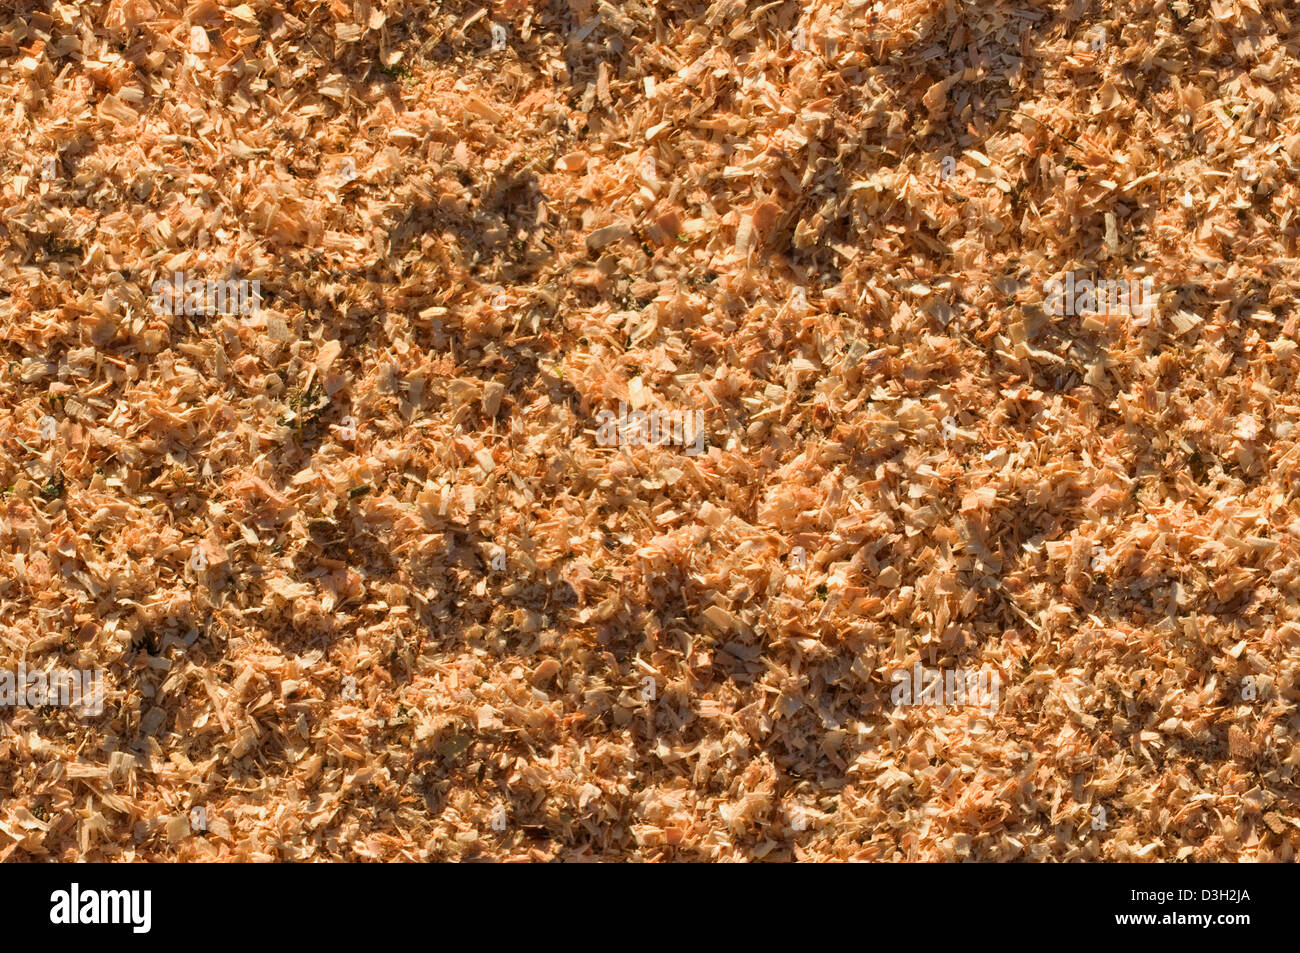 Sunlit sawdust background seamlessly tileable Stock Photo